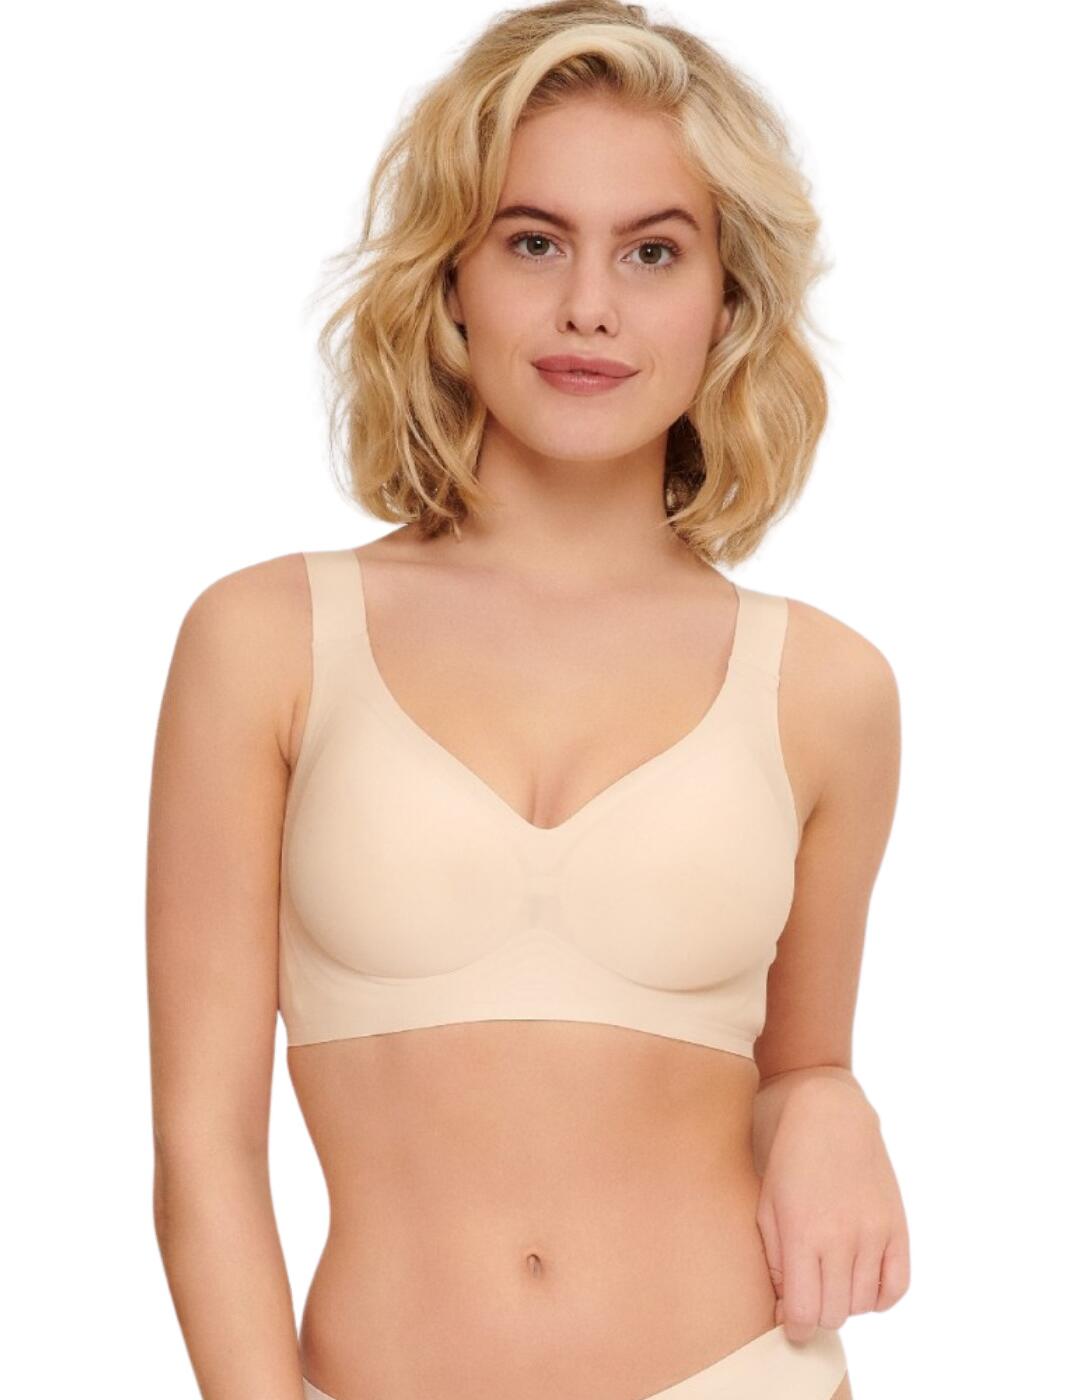 Lingadore Basic Collection Invisible Padded Soft Bra - Belle Lingerie   Lingadore Basic Collection Invisible Padded Soft Bra - Belle Lingerie